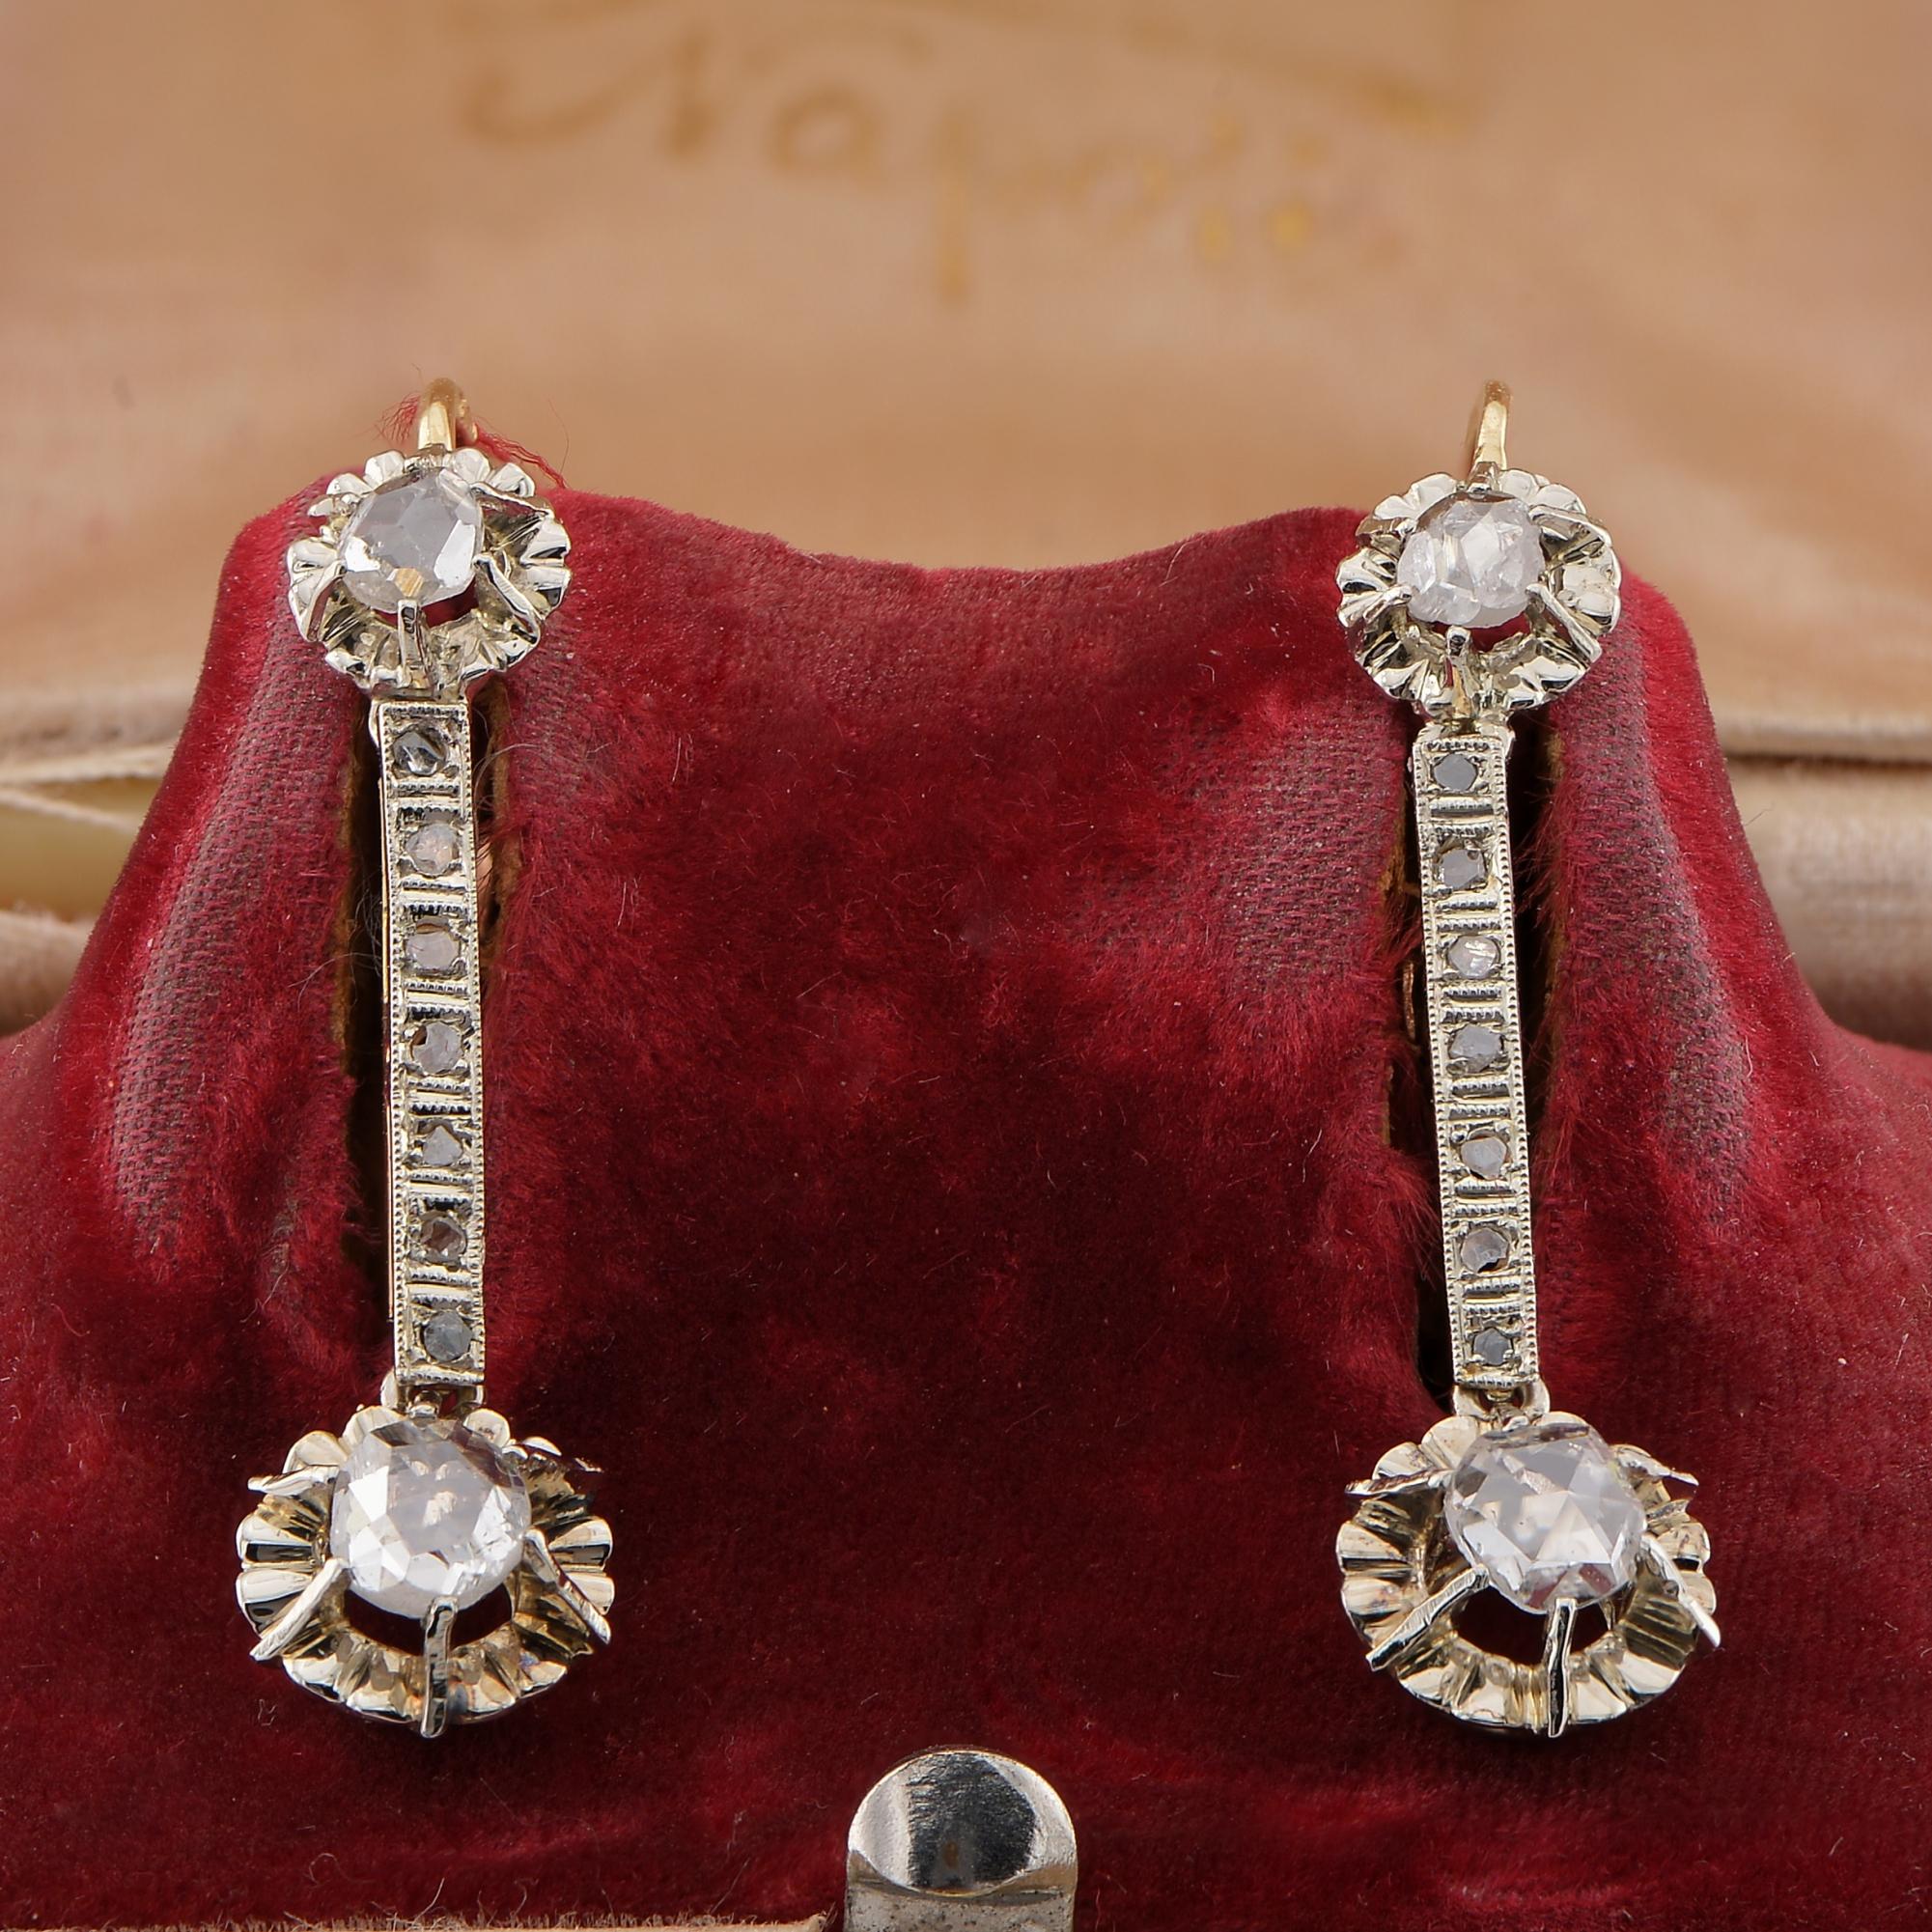 The Charming Dormeuse
Sweet and charming antique early Art Deco Dourmeuse earrings hand crafted of solid 18 KT bearing several hallmarks probably Austro Hungarian from the period, quite indistinct
Classy dormeuse design as for tradition, set